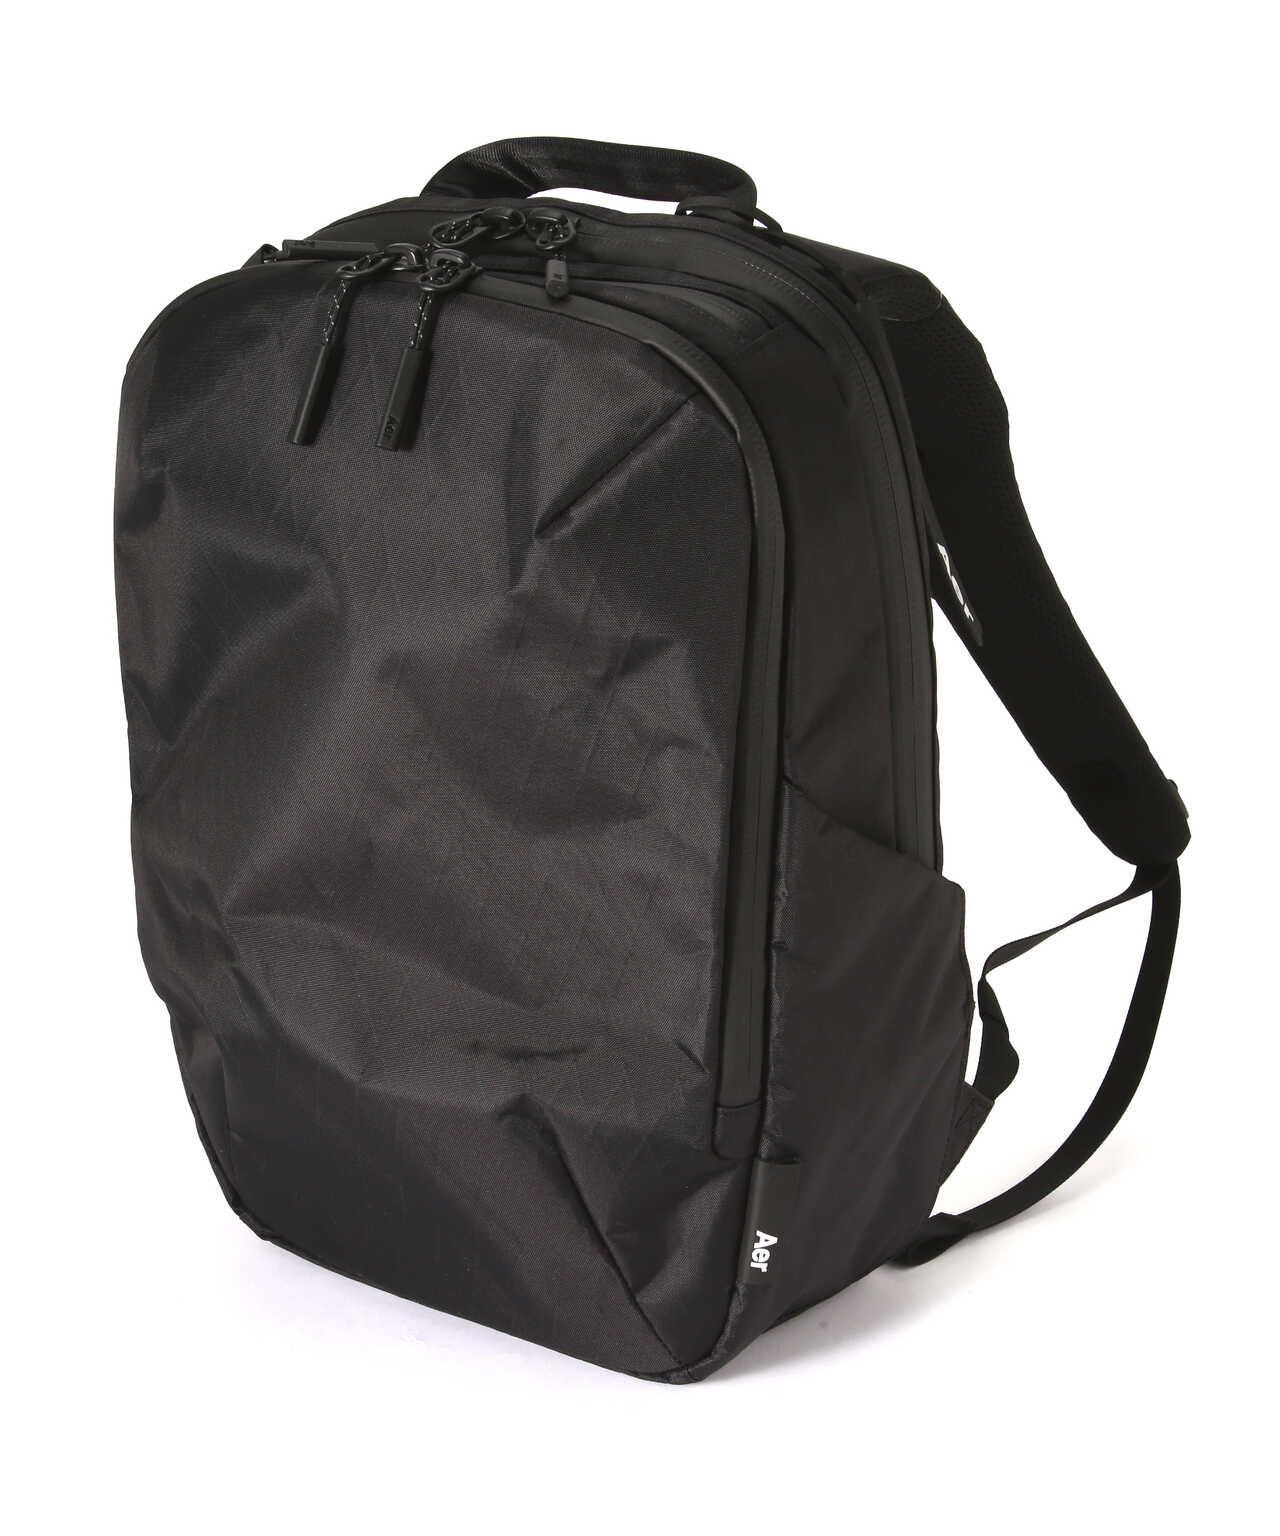 Aer（エアー）Day Pack2 X-PAC 高耐水・高耐久バッグ 正規商品148L